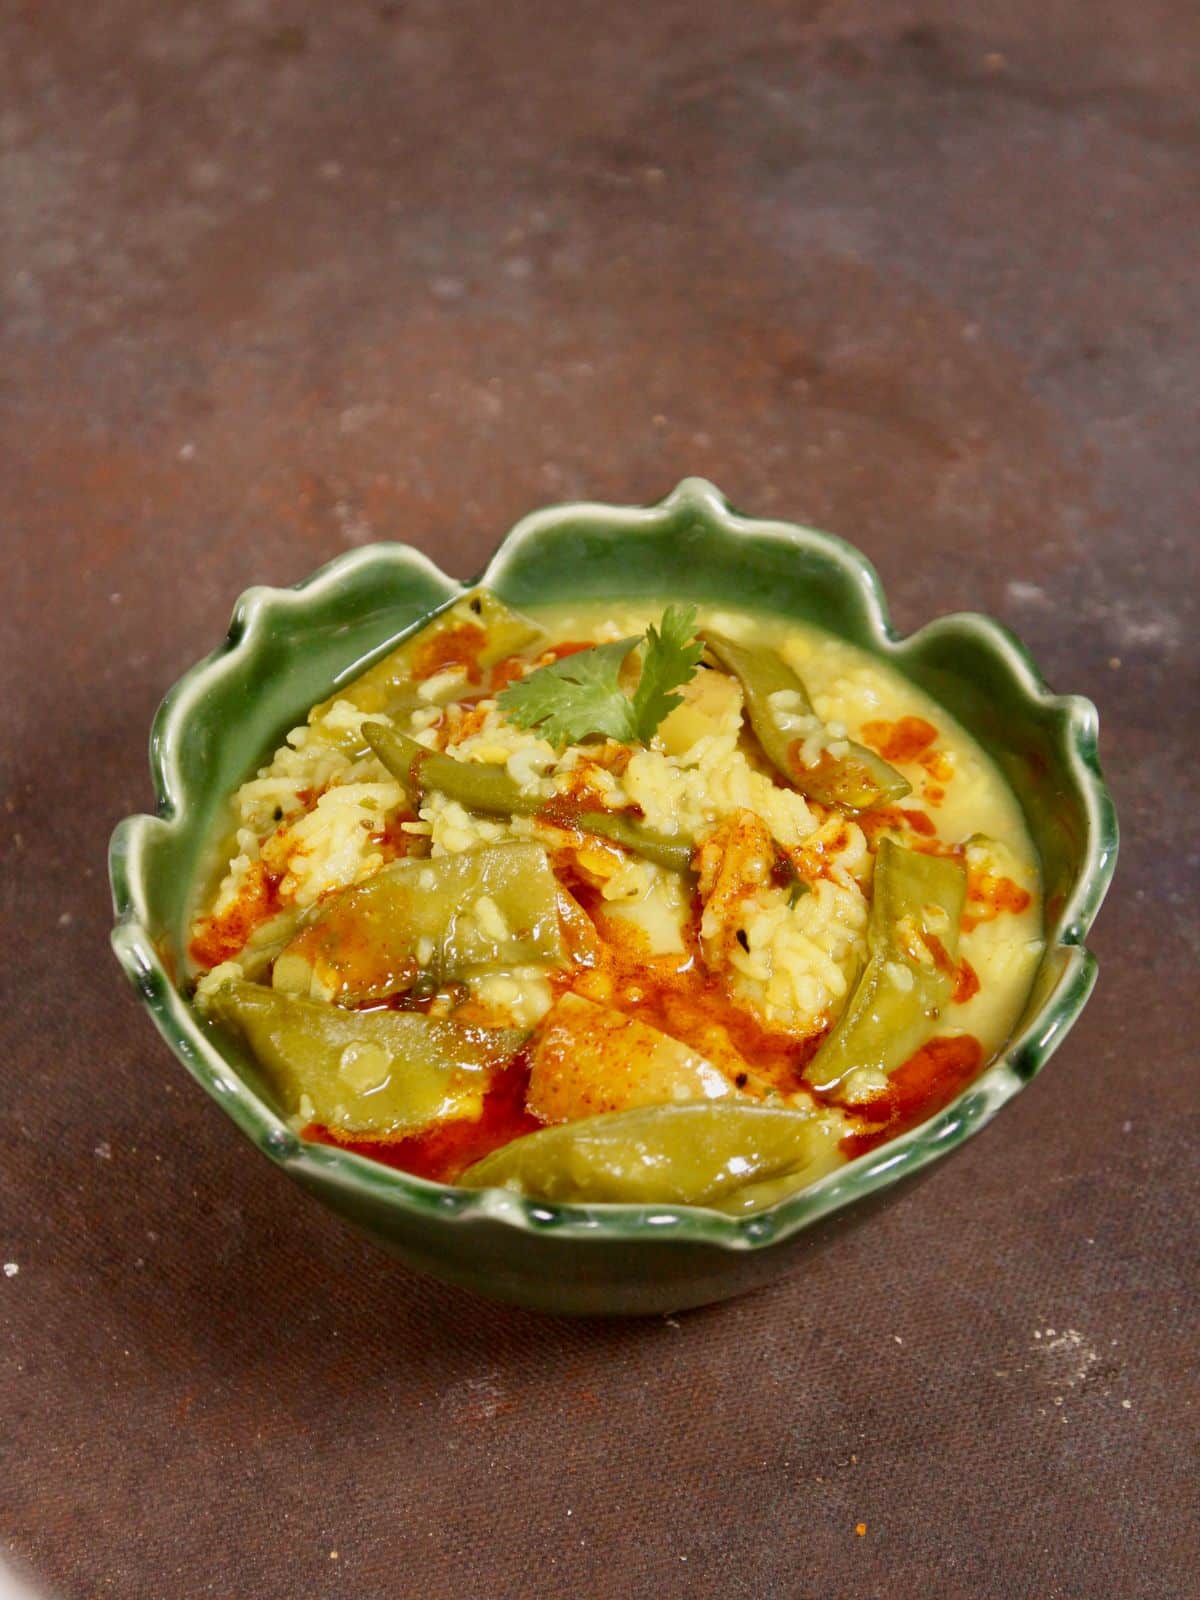 garnish the khichdi with red chili oil and serve hot 